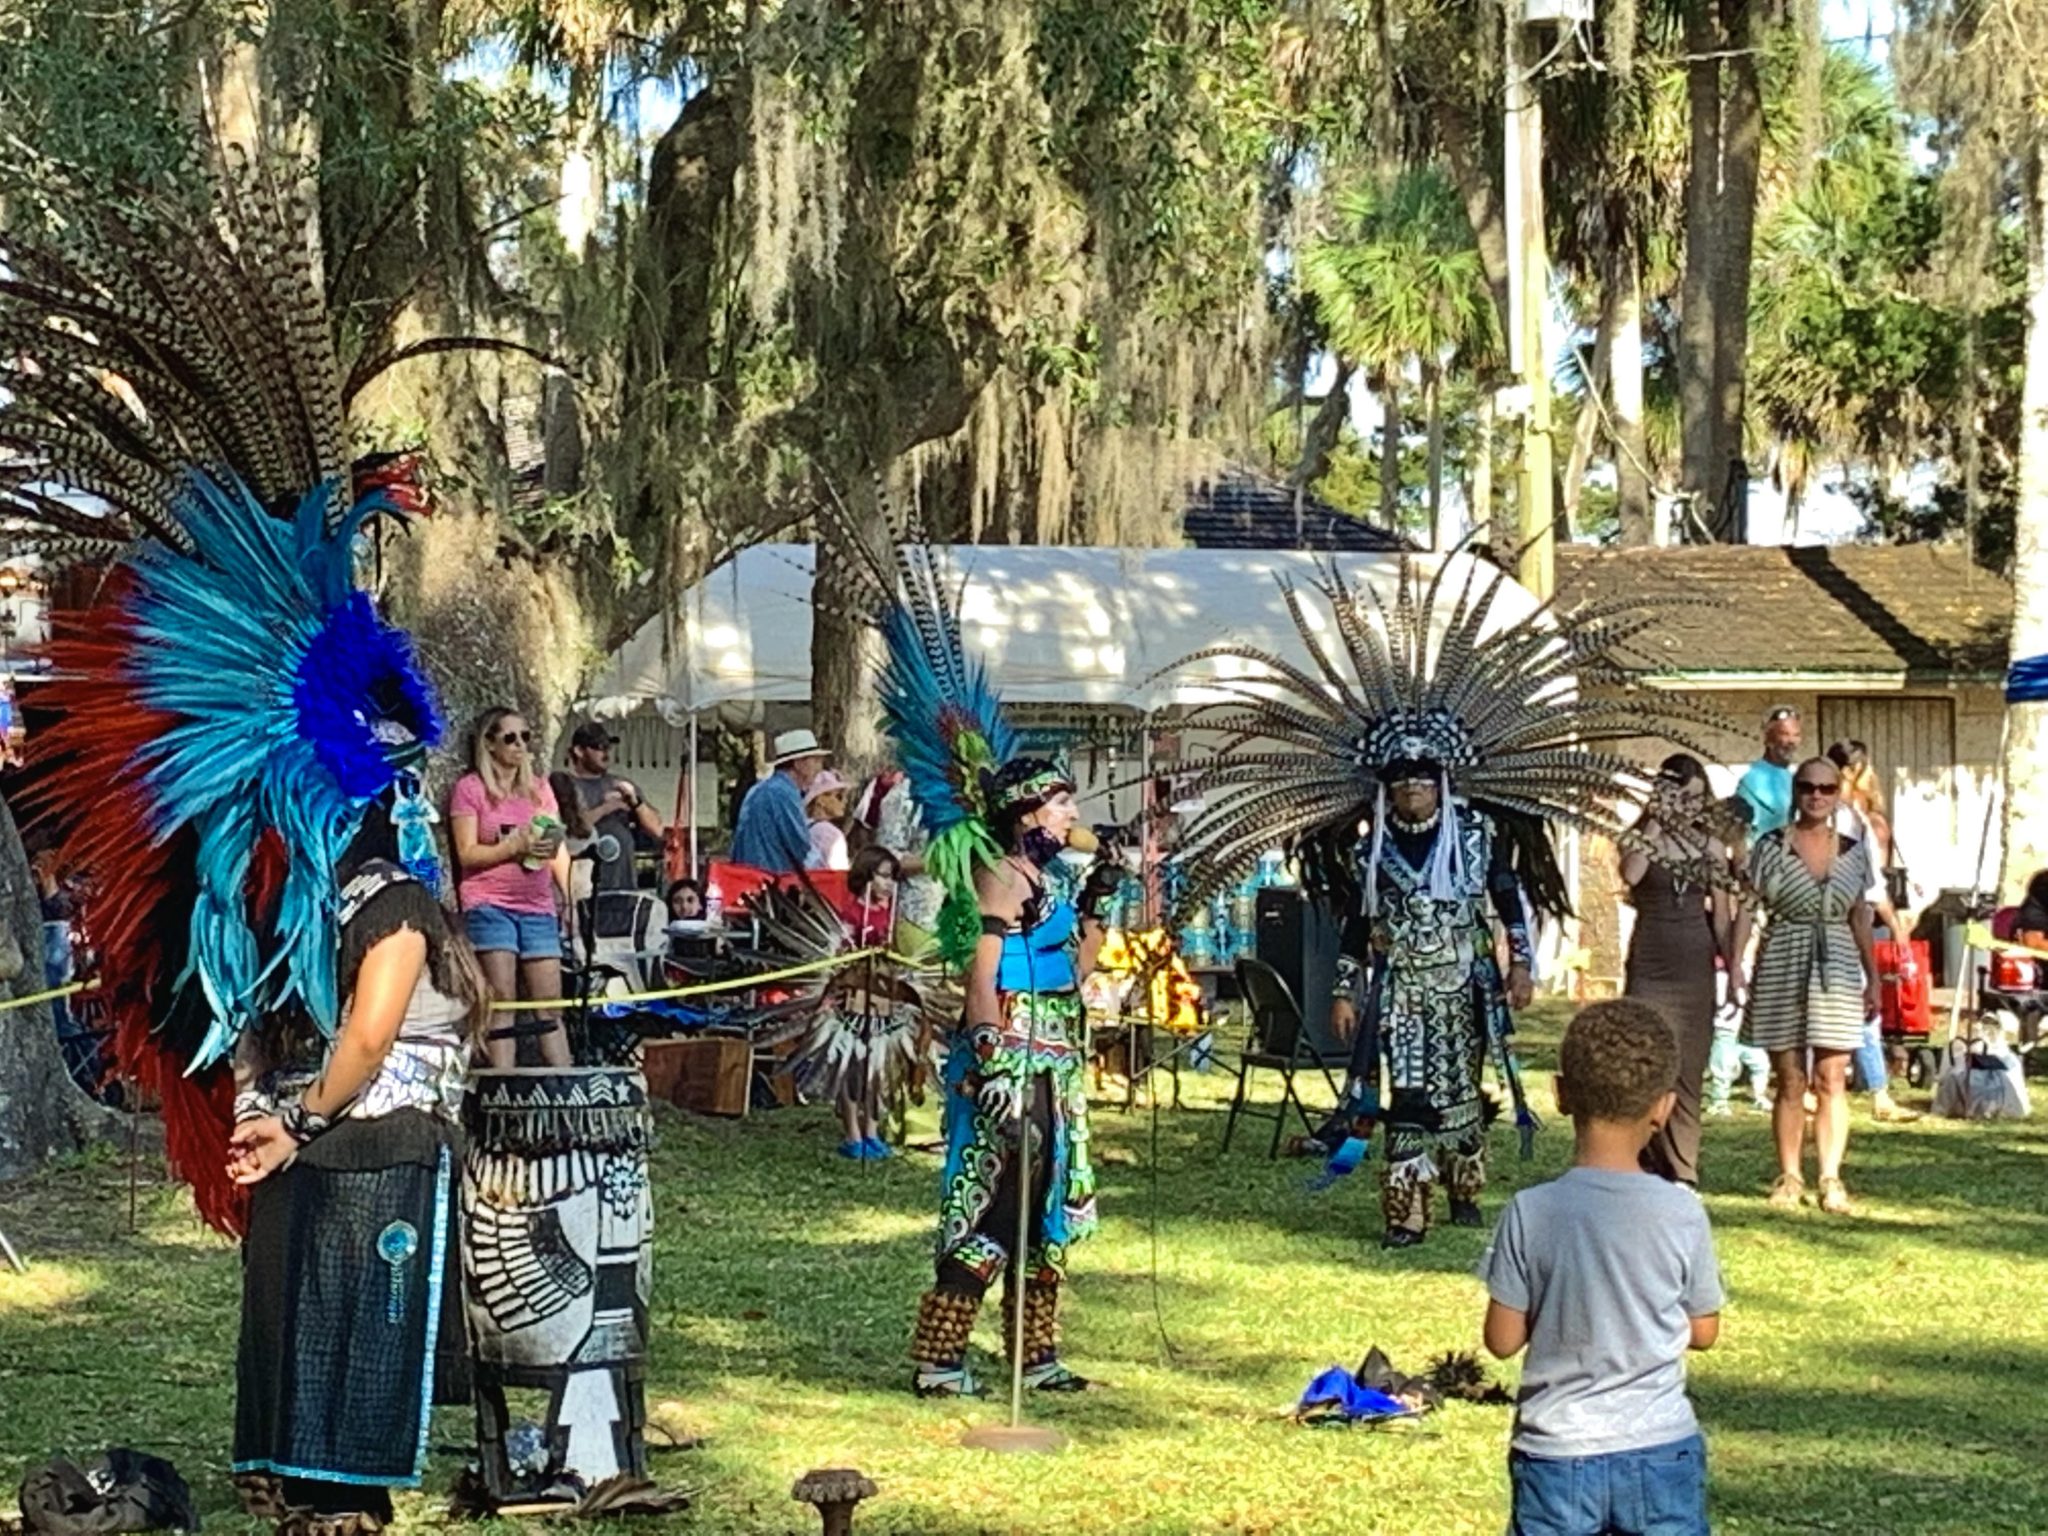 Flagler Celebrates 8th Annual Pow Wow at Princess Place Preserve